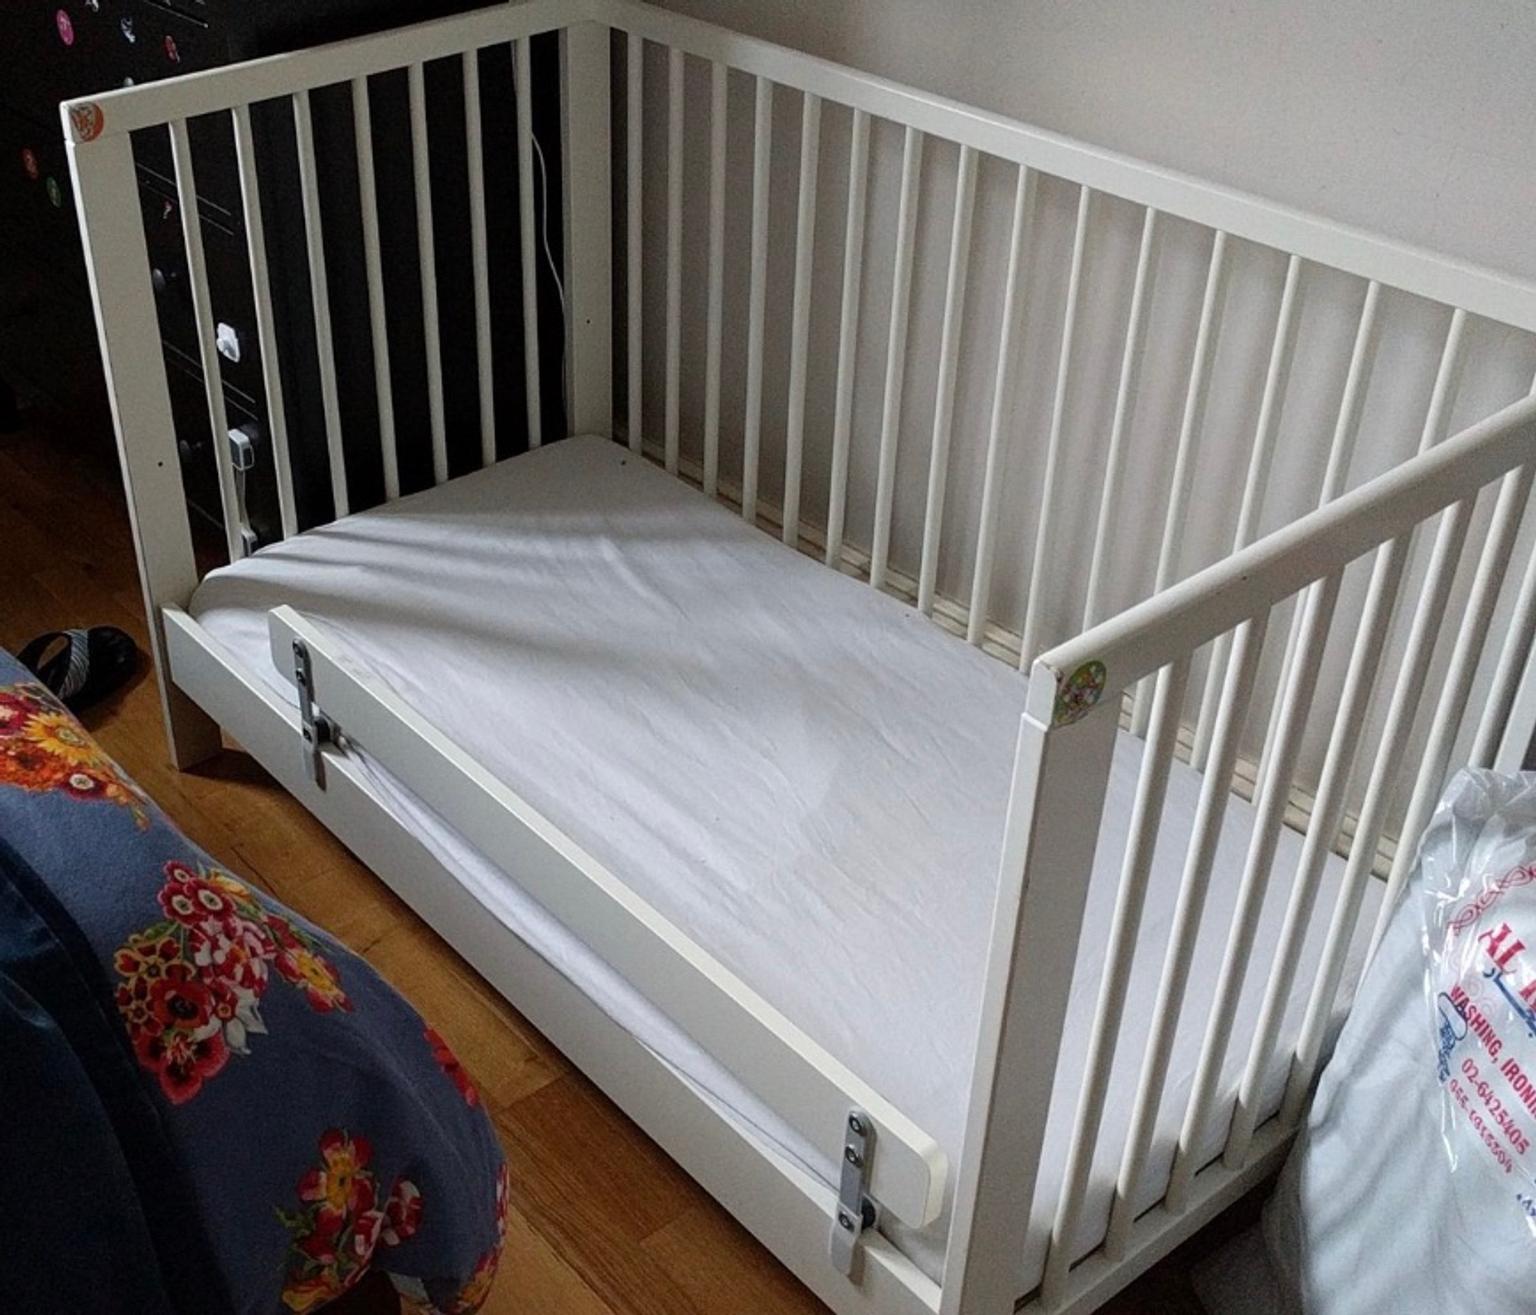 ikea cot toddler bed